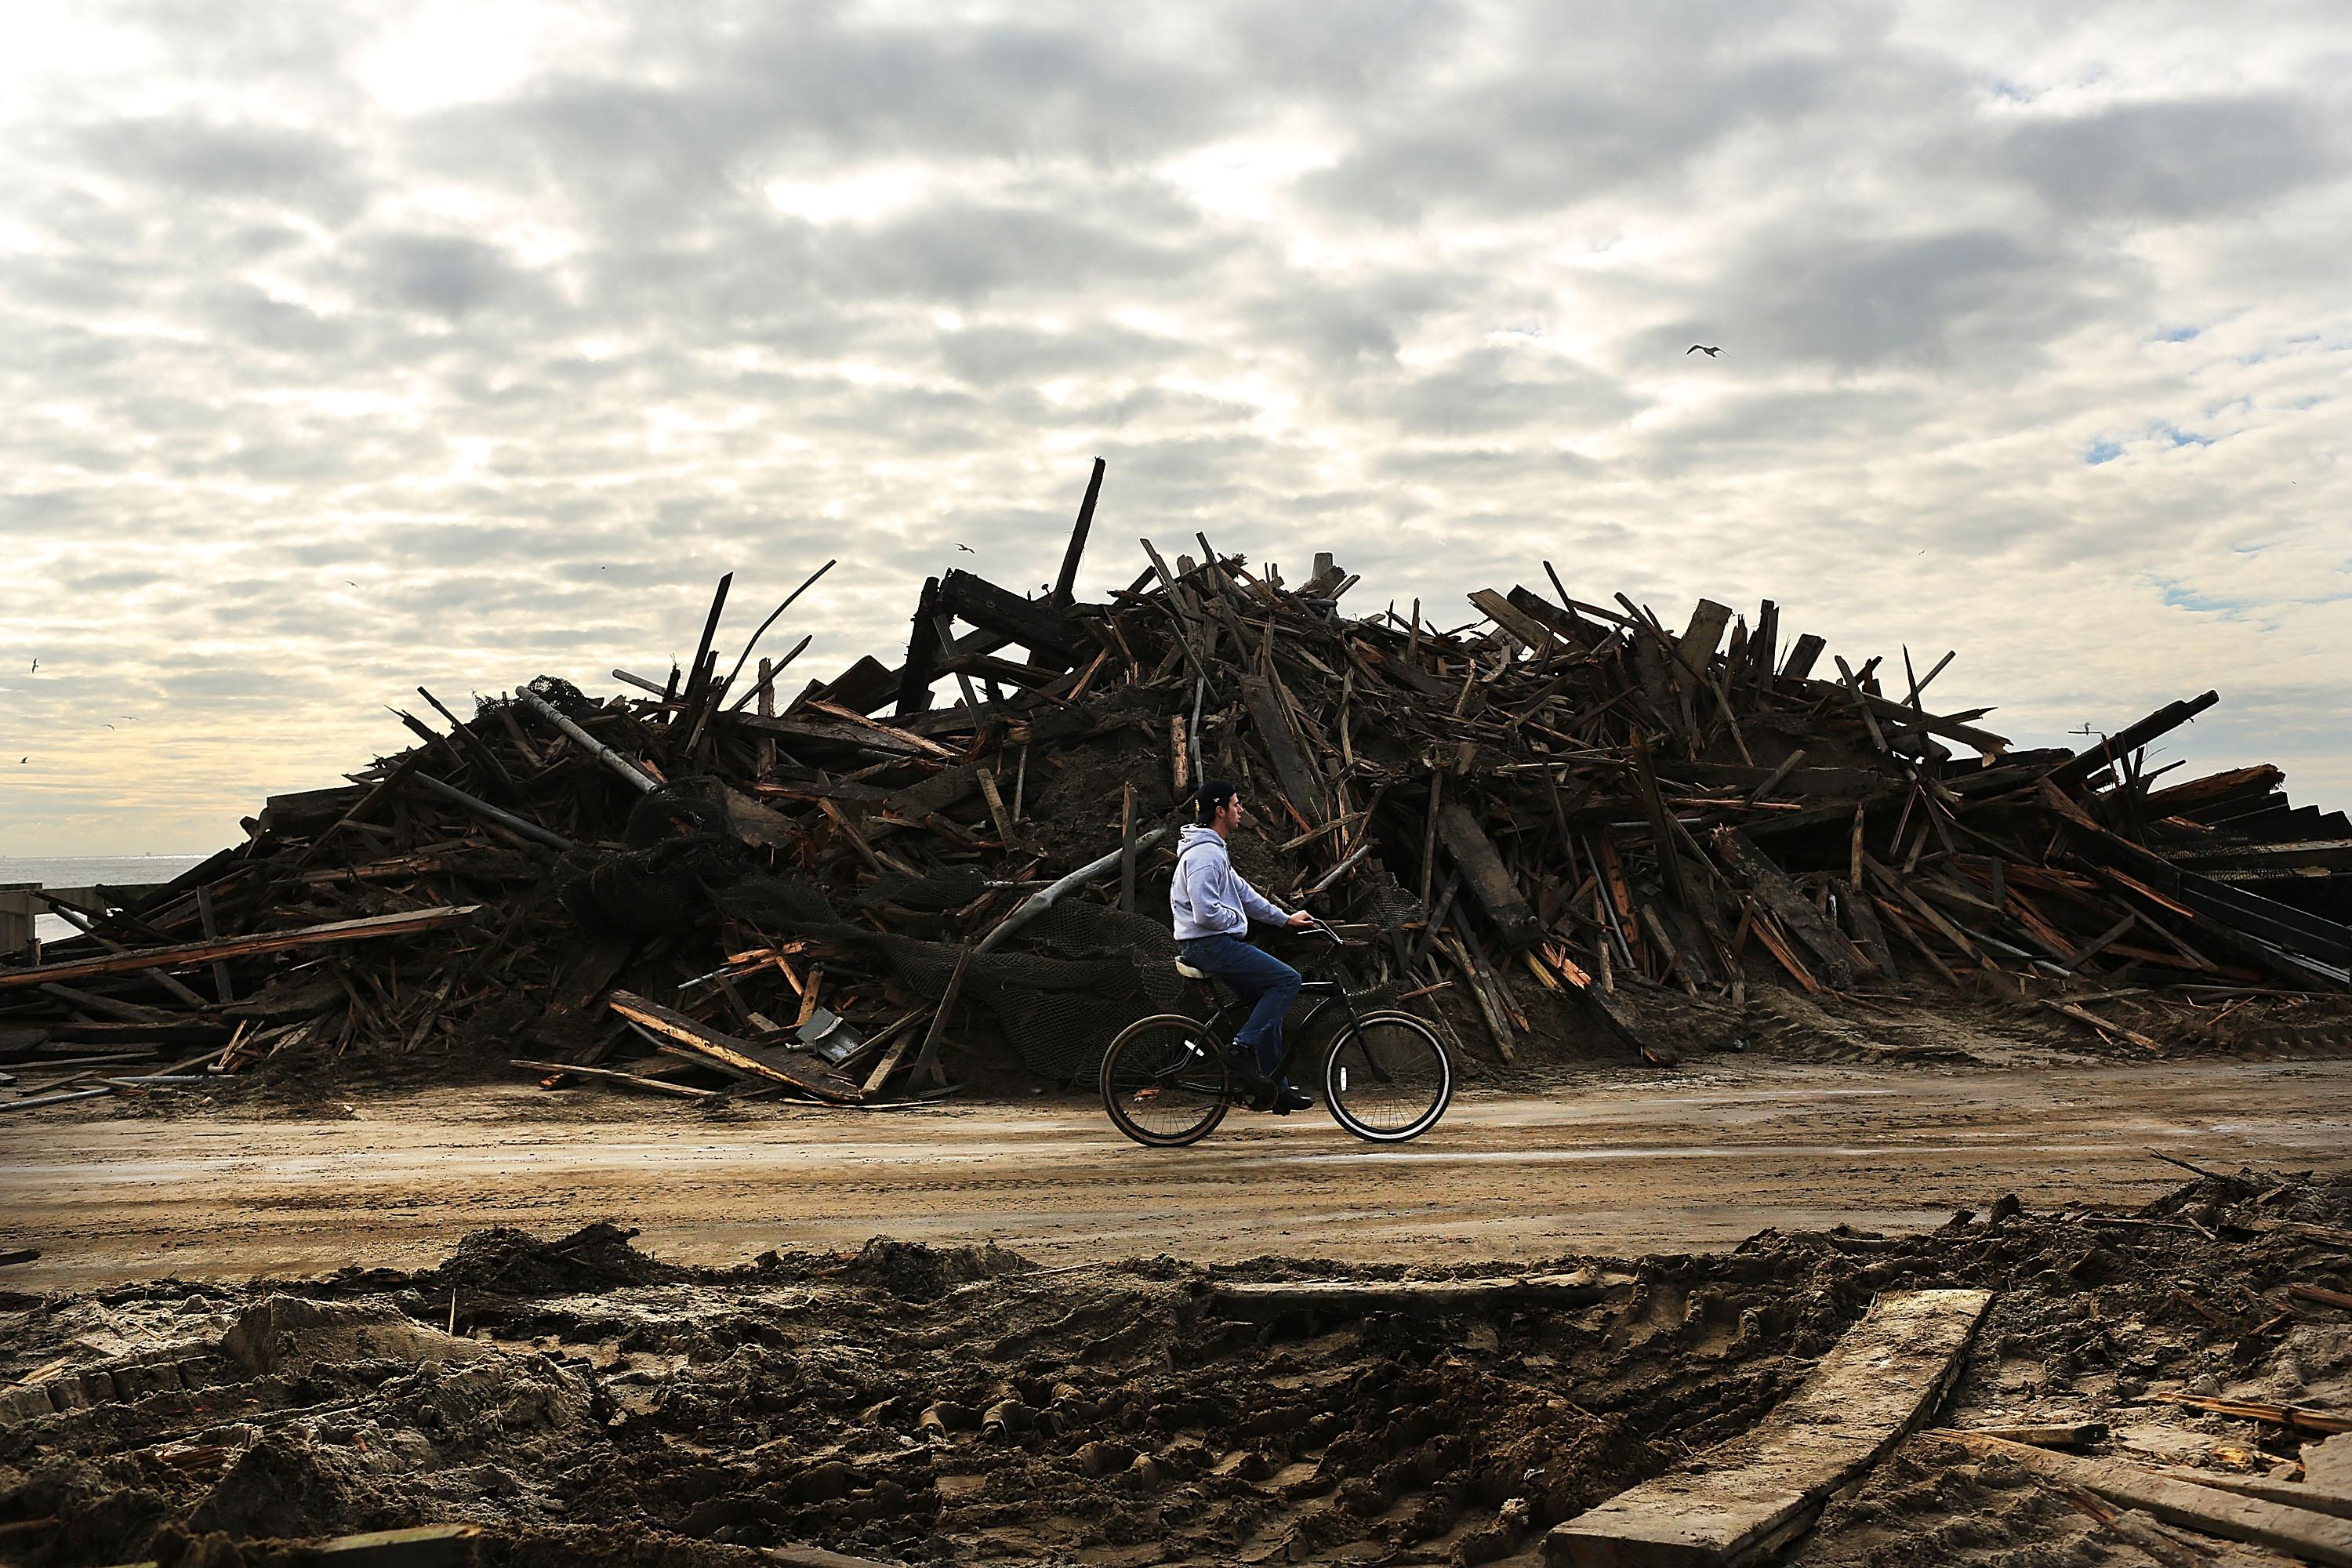 A man rides his bike through the heavily damaged Rockaway neighborhood, in Queens where a large section of the iconic boardwalk was washed away on November 2, 2012 in New York.